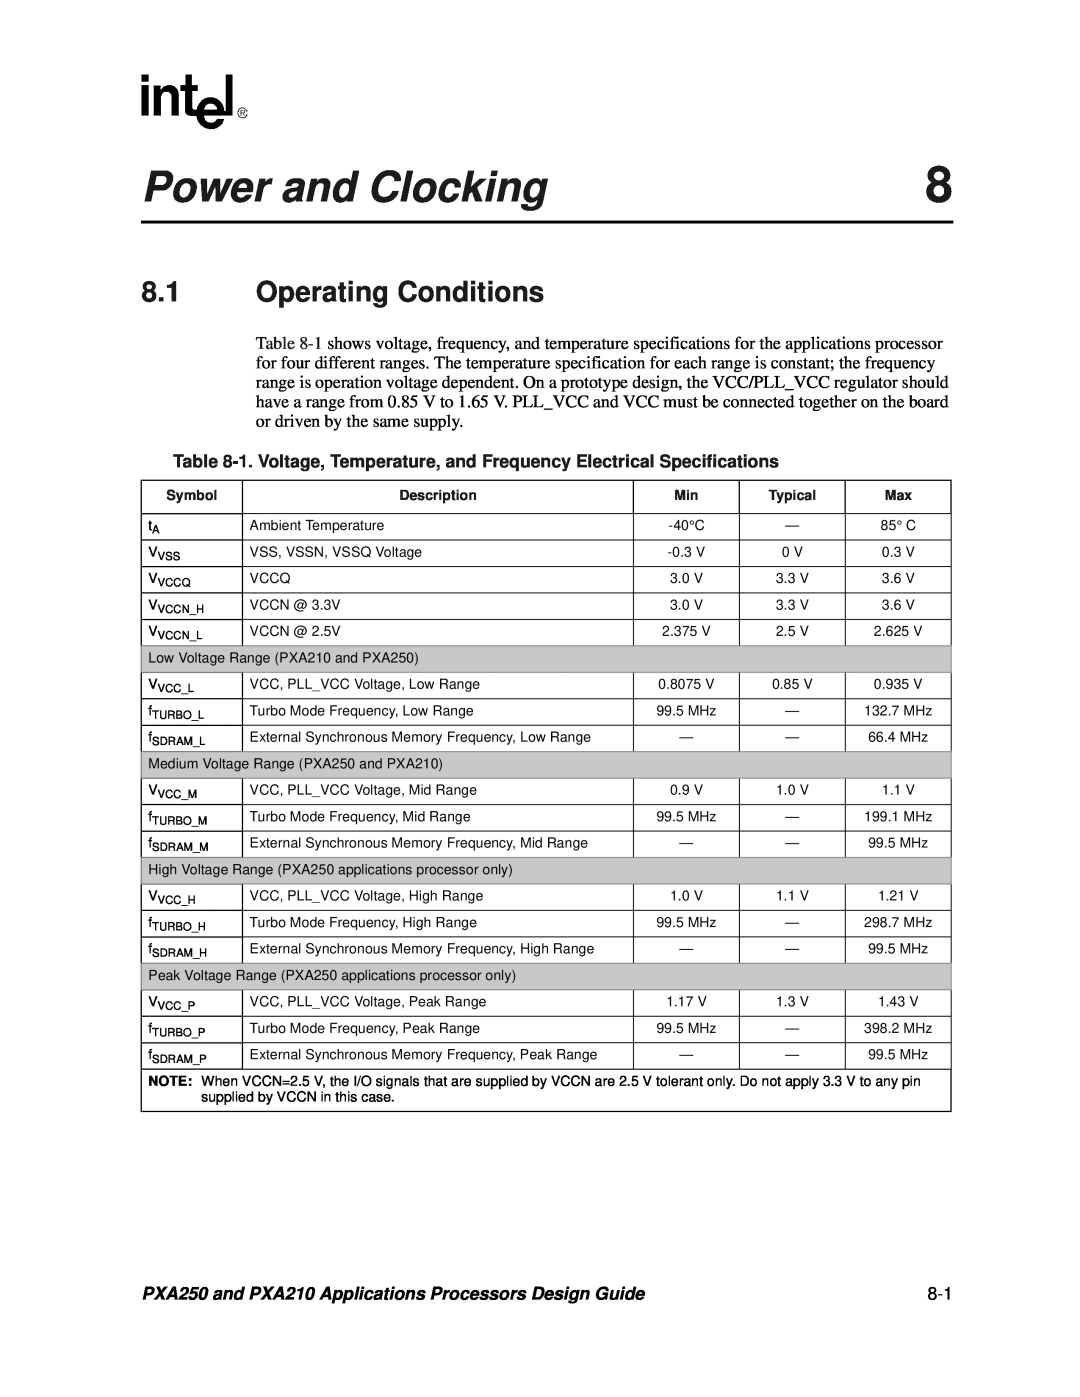 Intel manual Power and Clocking, Operating Conditions, PXA250 and PXA210 Applications Processors Design Guide 